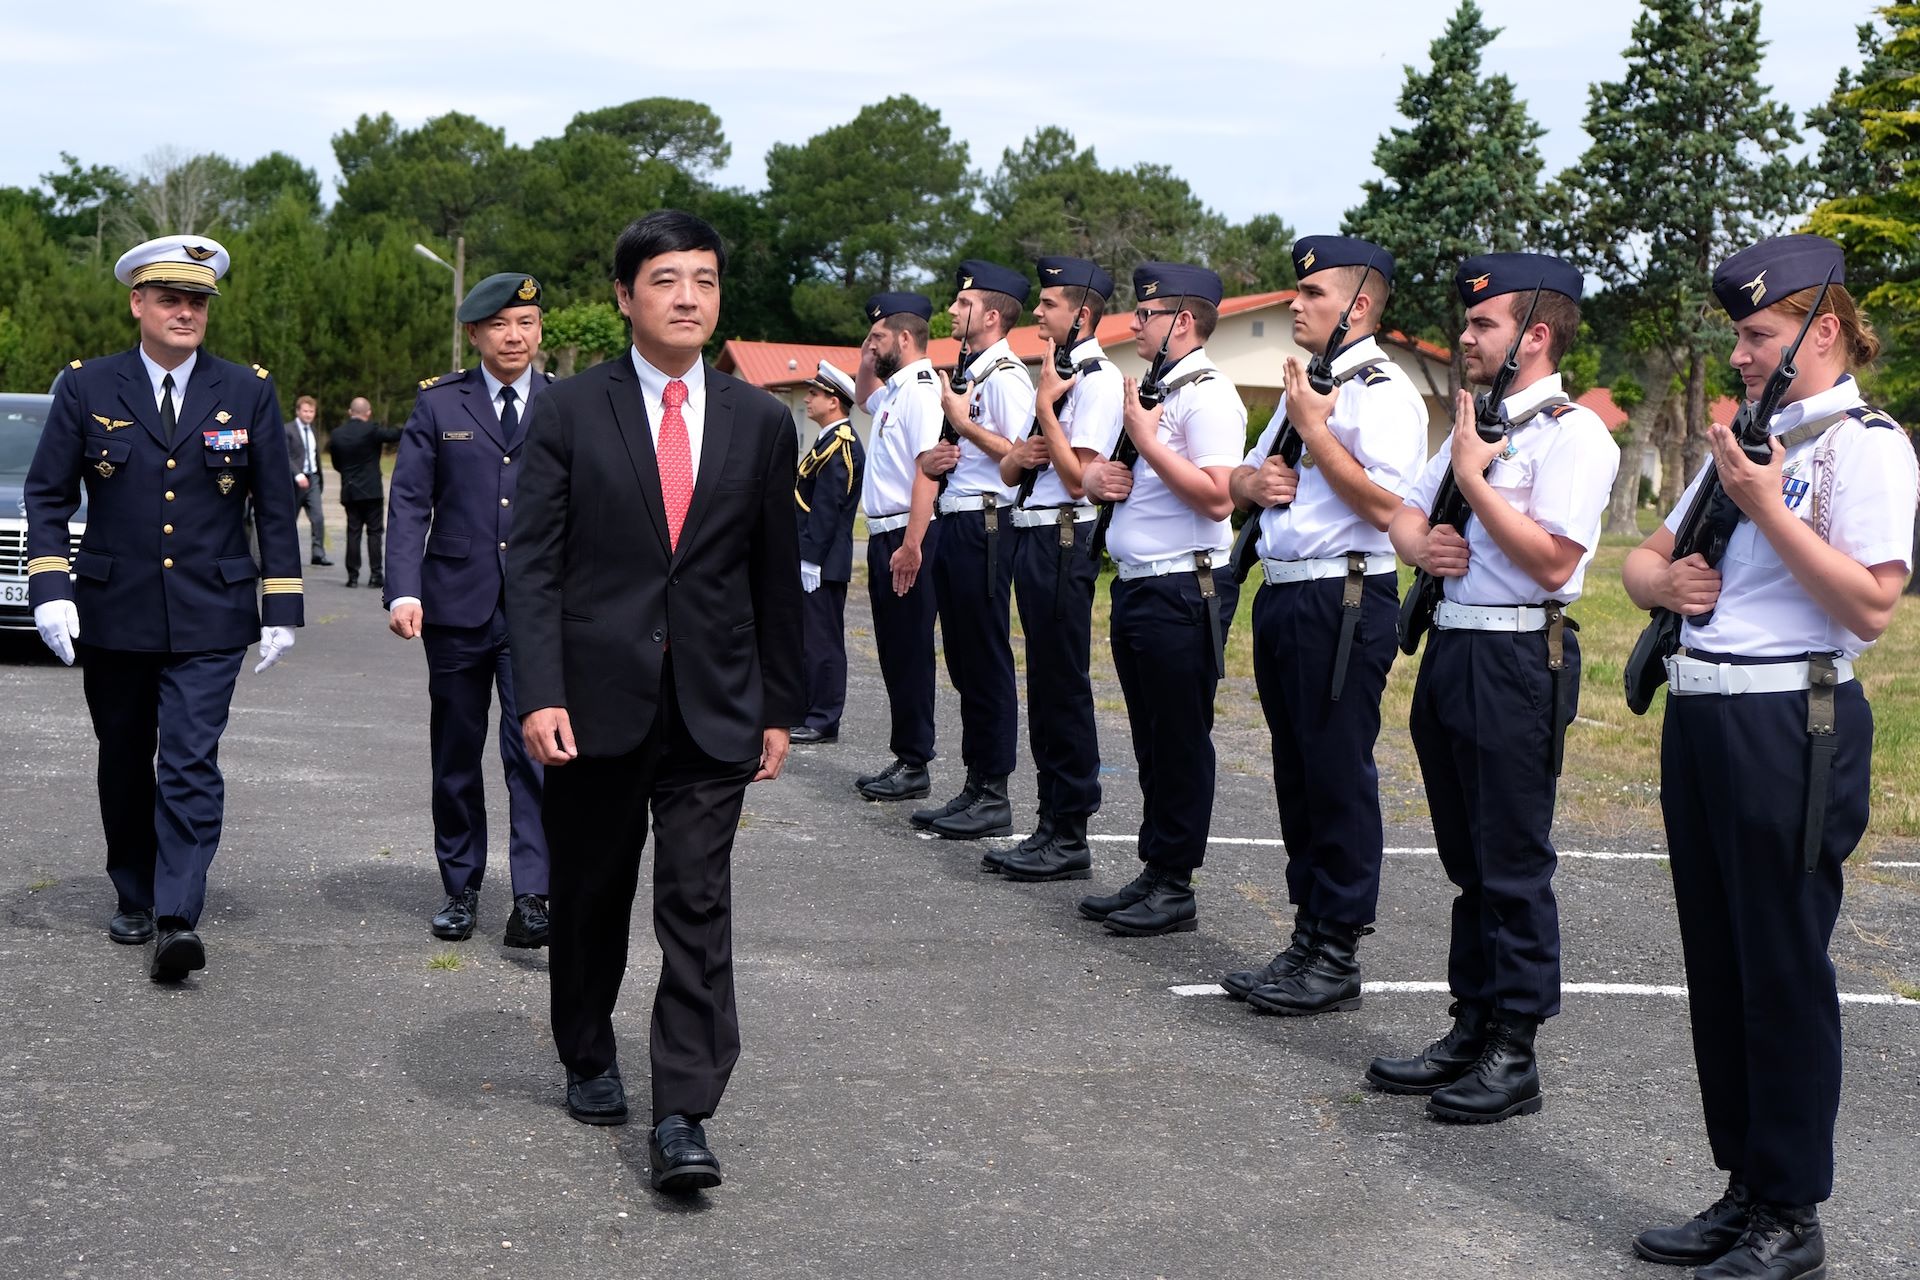 SMS Heng reaffirms Singapore-France defence relations